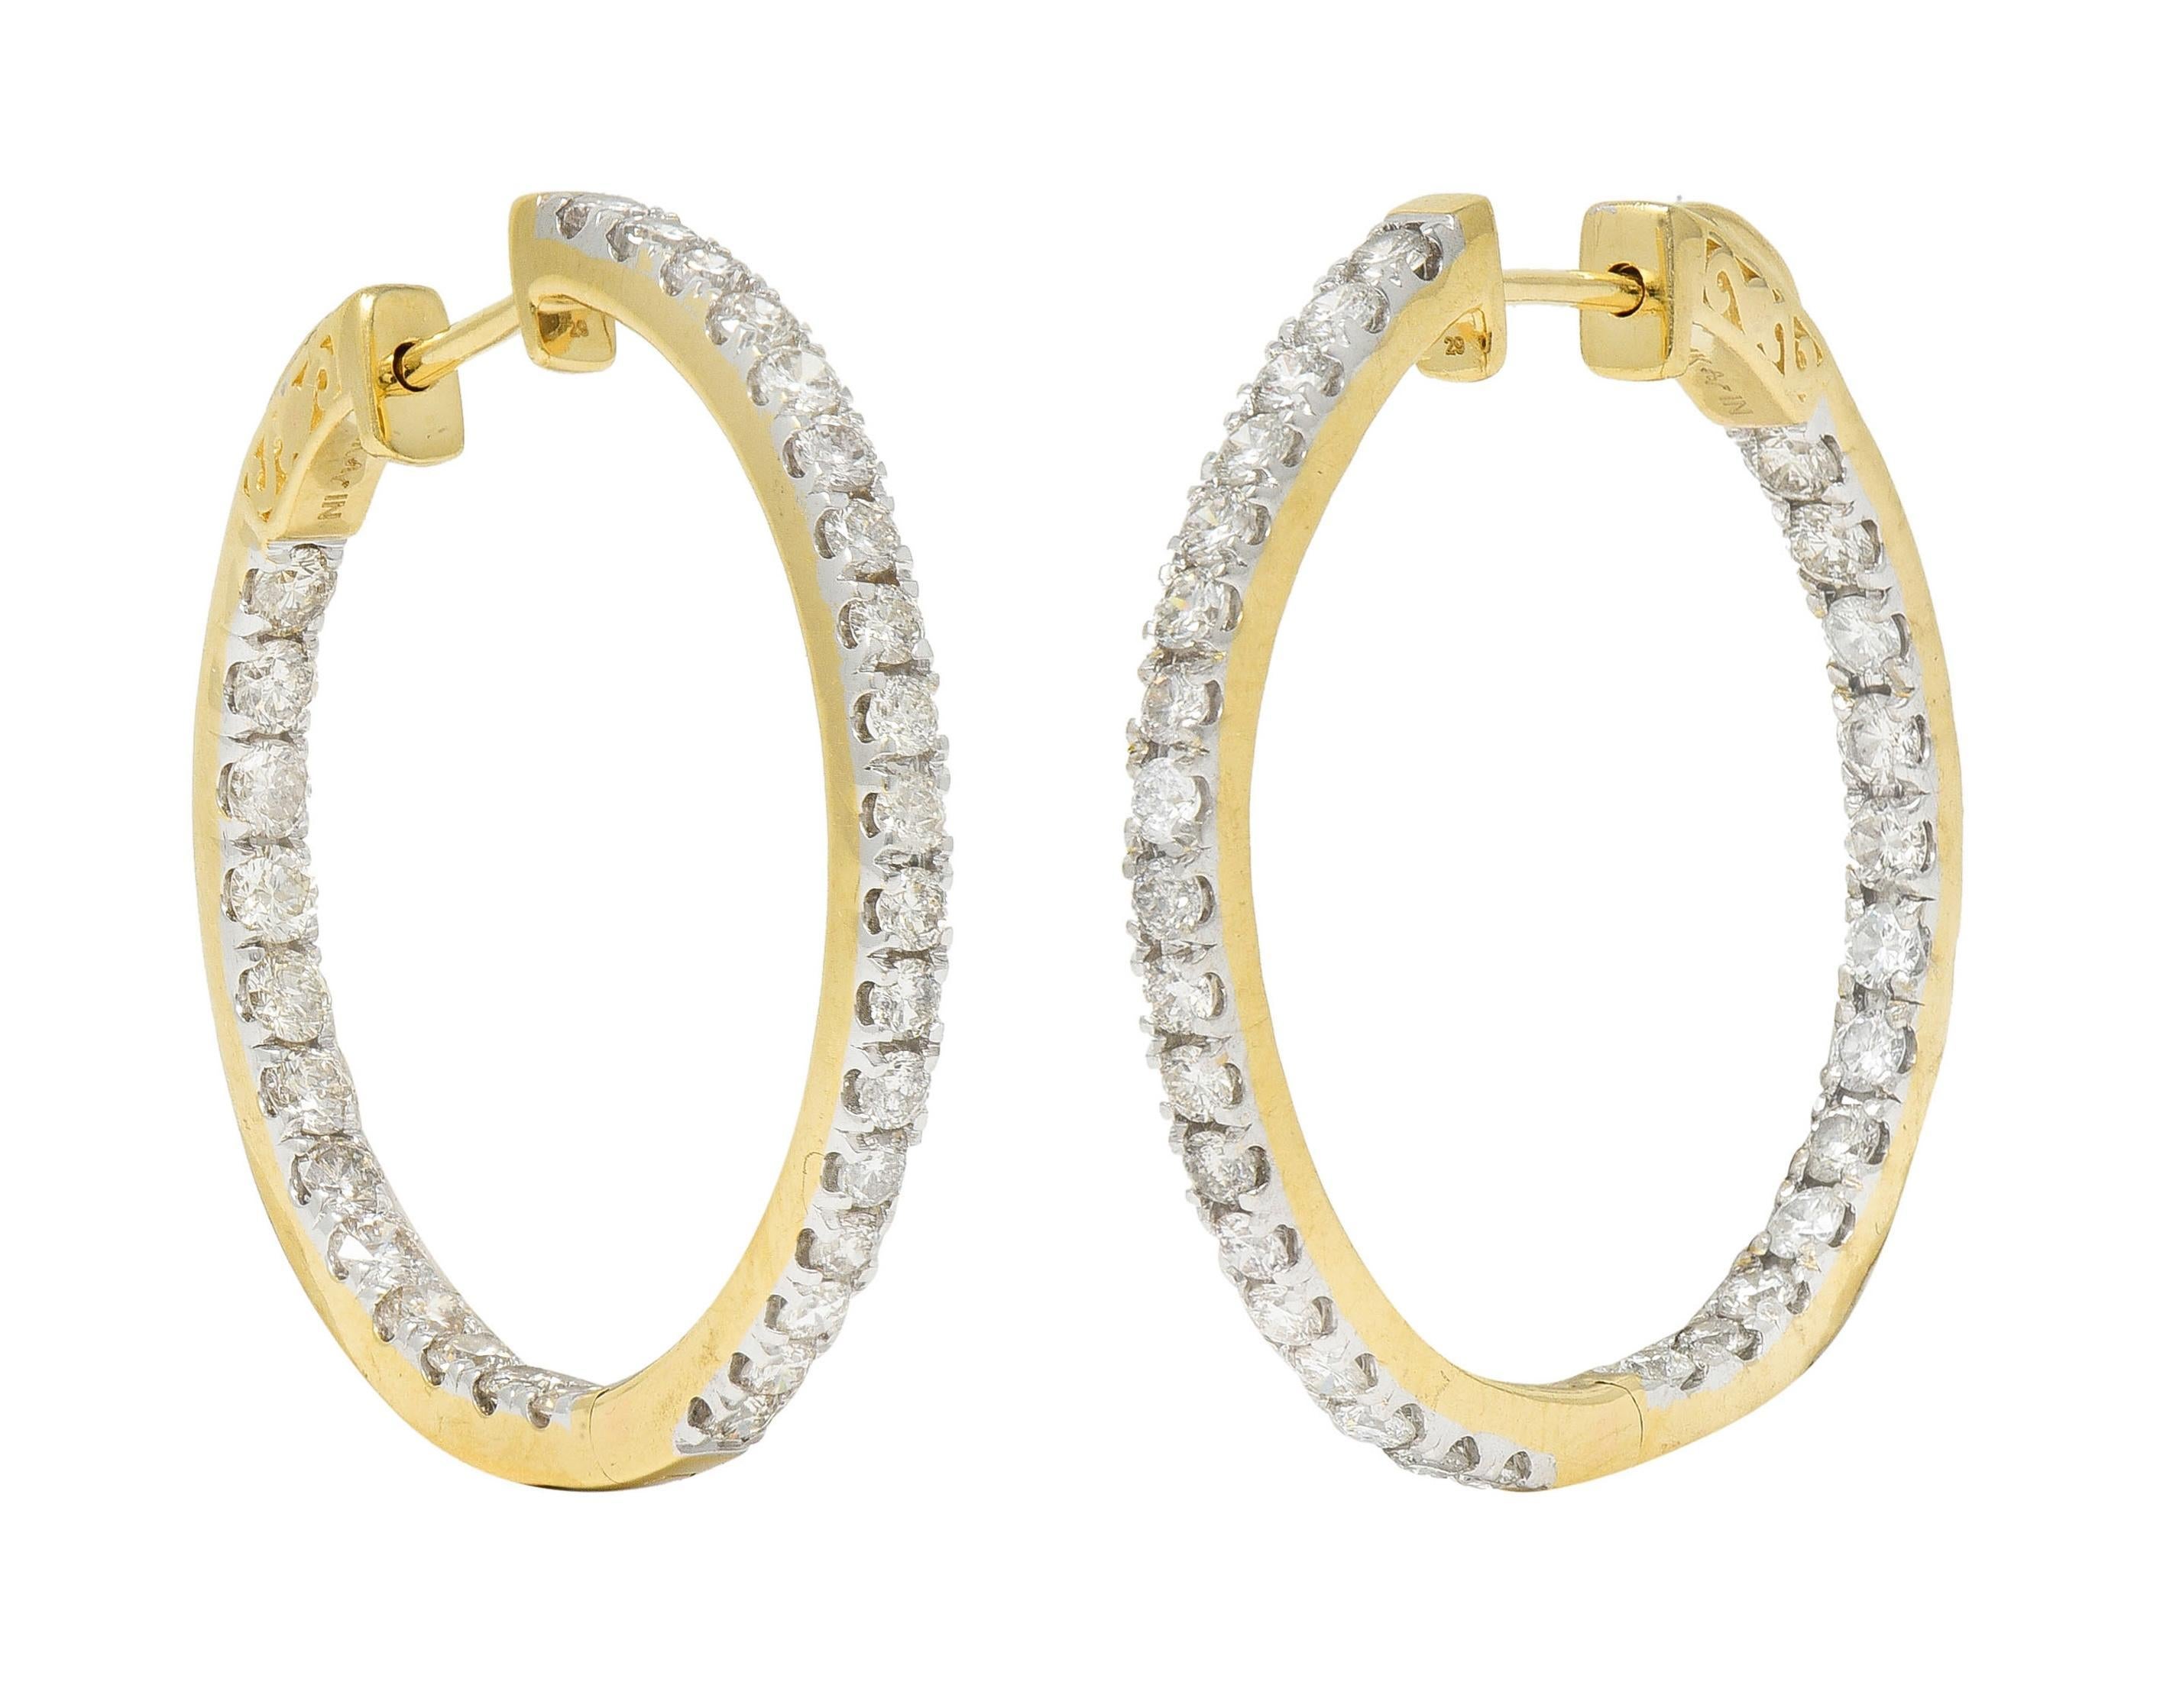 Designed as round hoops featuring round brilliant cut diamonds inside-outside style
Weighing approximately 1.80 carats total - G/H color with VS1 clarity
Set with white gold prongs
Hoops open on a hinge
Completed by notched posts
Stamped 14 karat